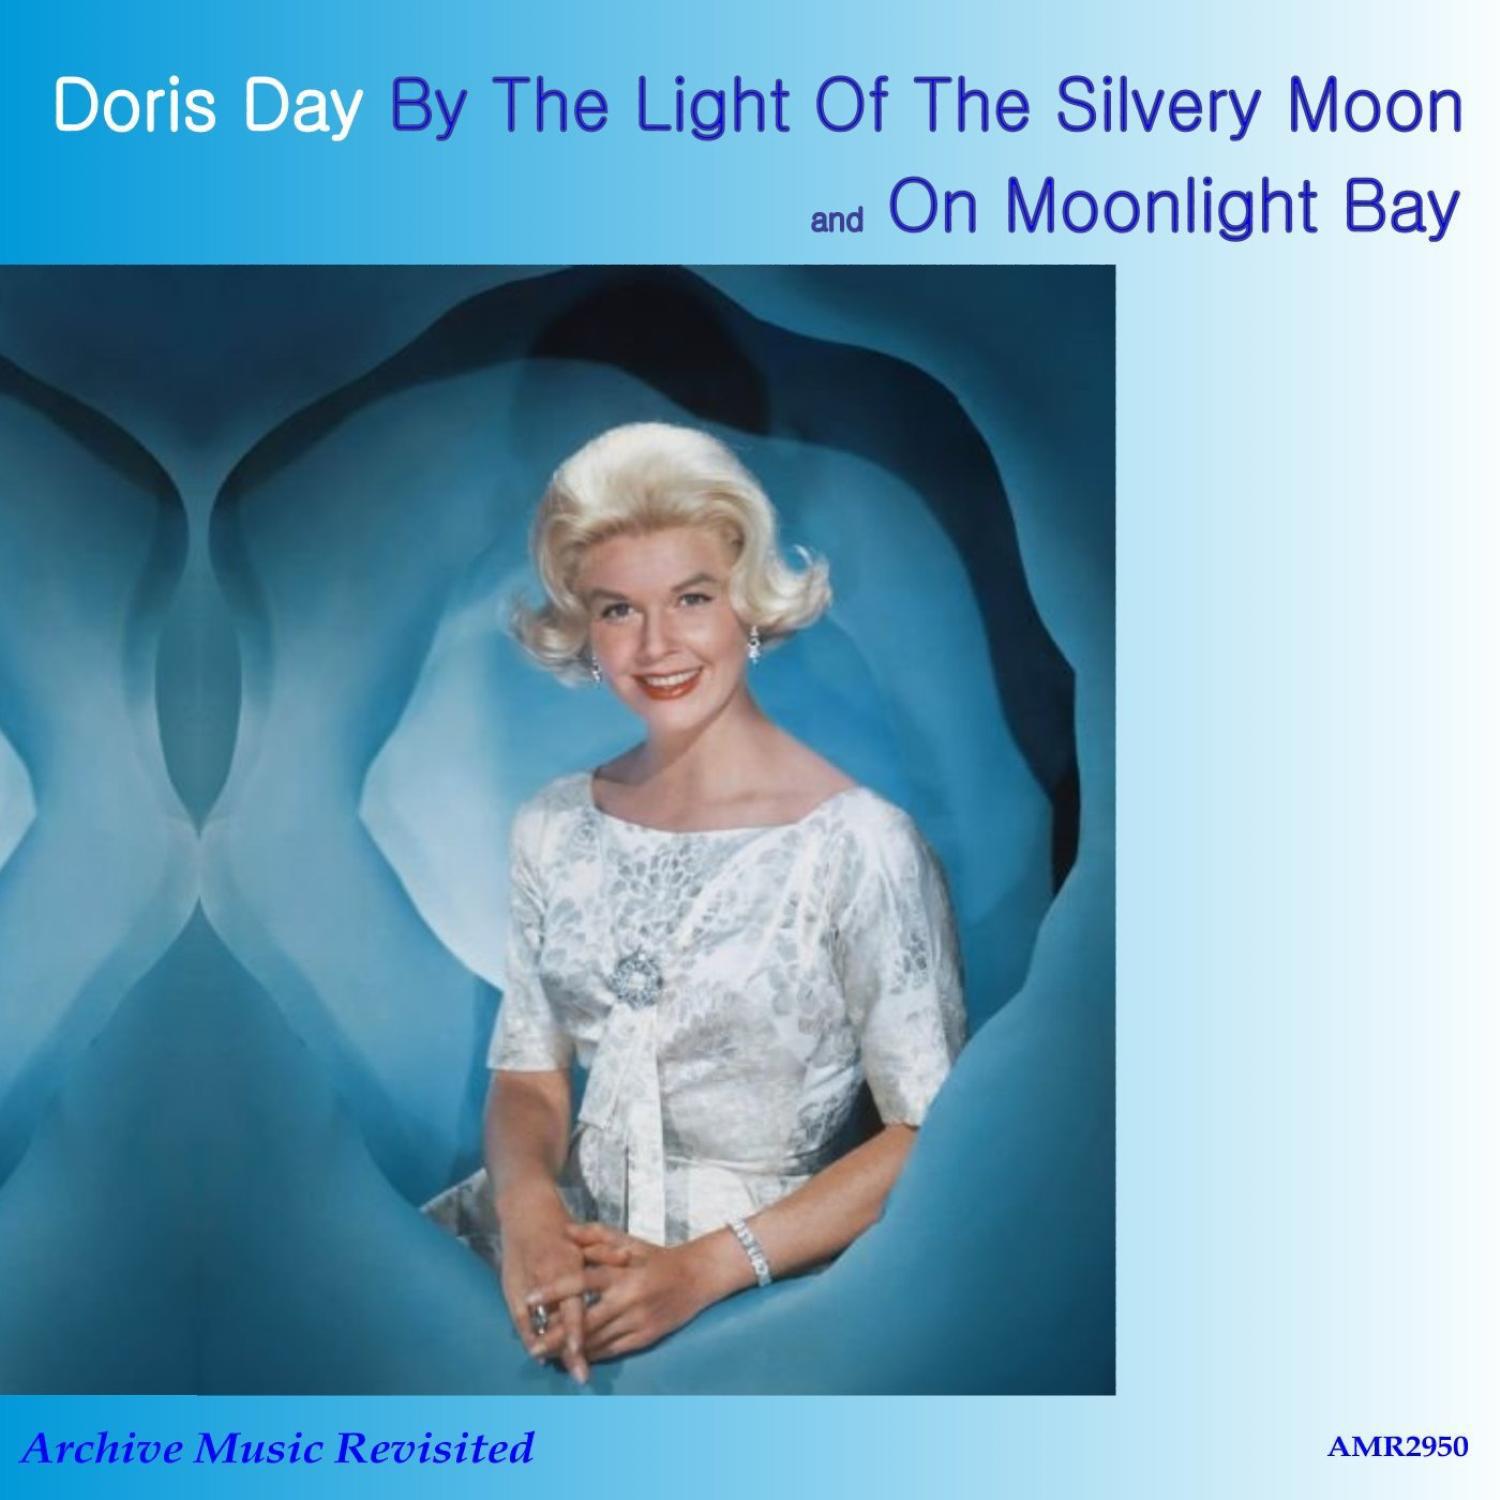 On Moonlight Bay & By The Light Of The Silvery Moon